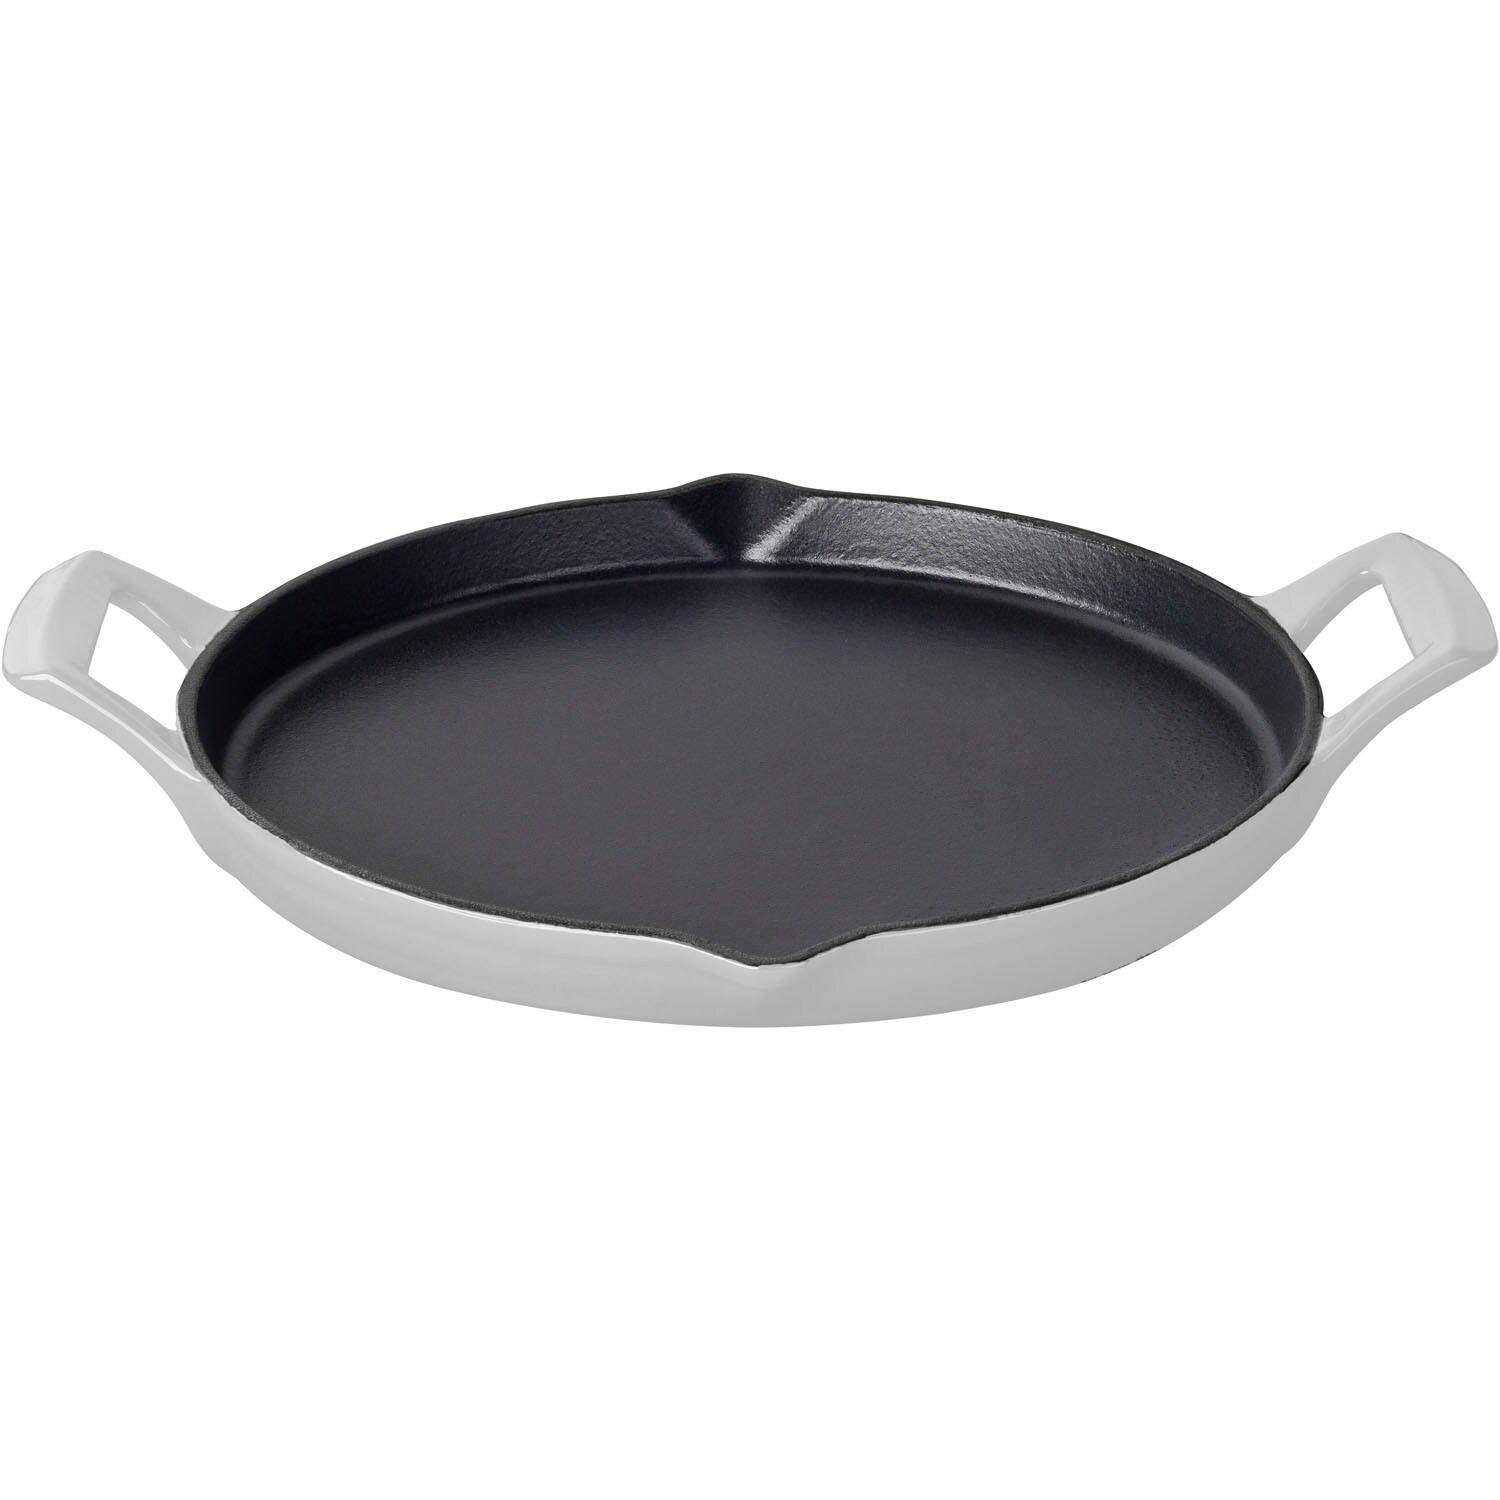 https://ak1.ostkcdn.com/images/products/12343478/La-Cuisine-Round-12-In.-Cast-Iron-Shallow-Griddle-with-2-Wedge-Handles-and-Enamel-Finish-White-96dba9ee-a2de-44fe-a35a-a898e3aa1408.jpg